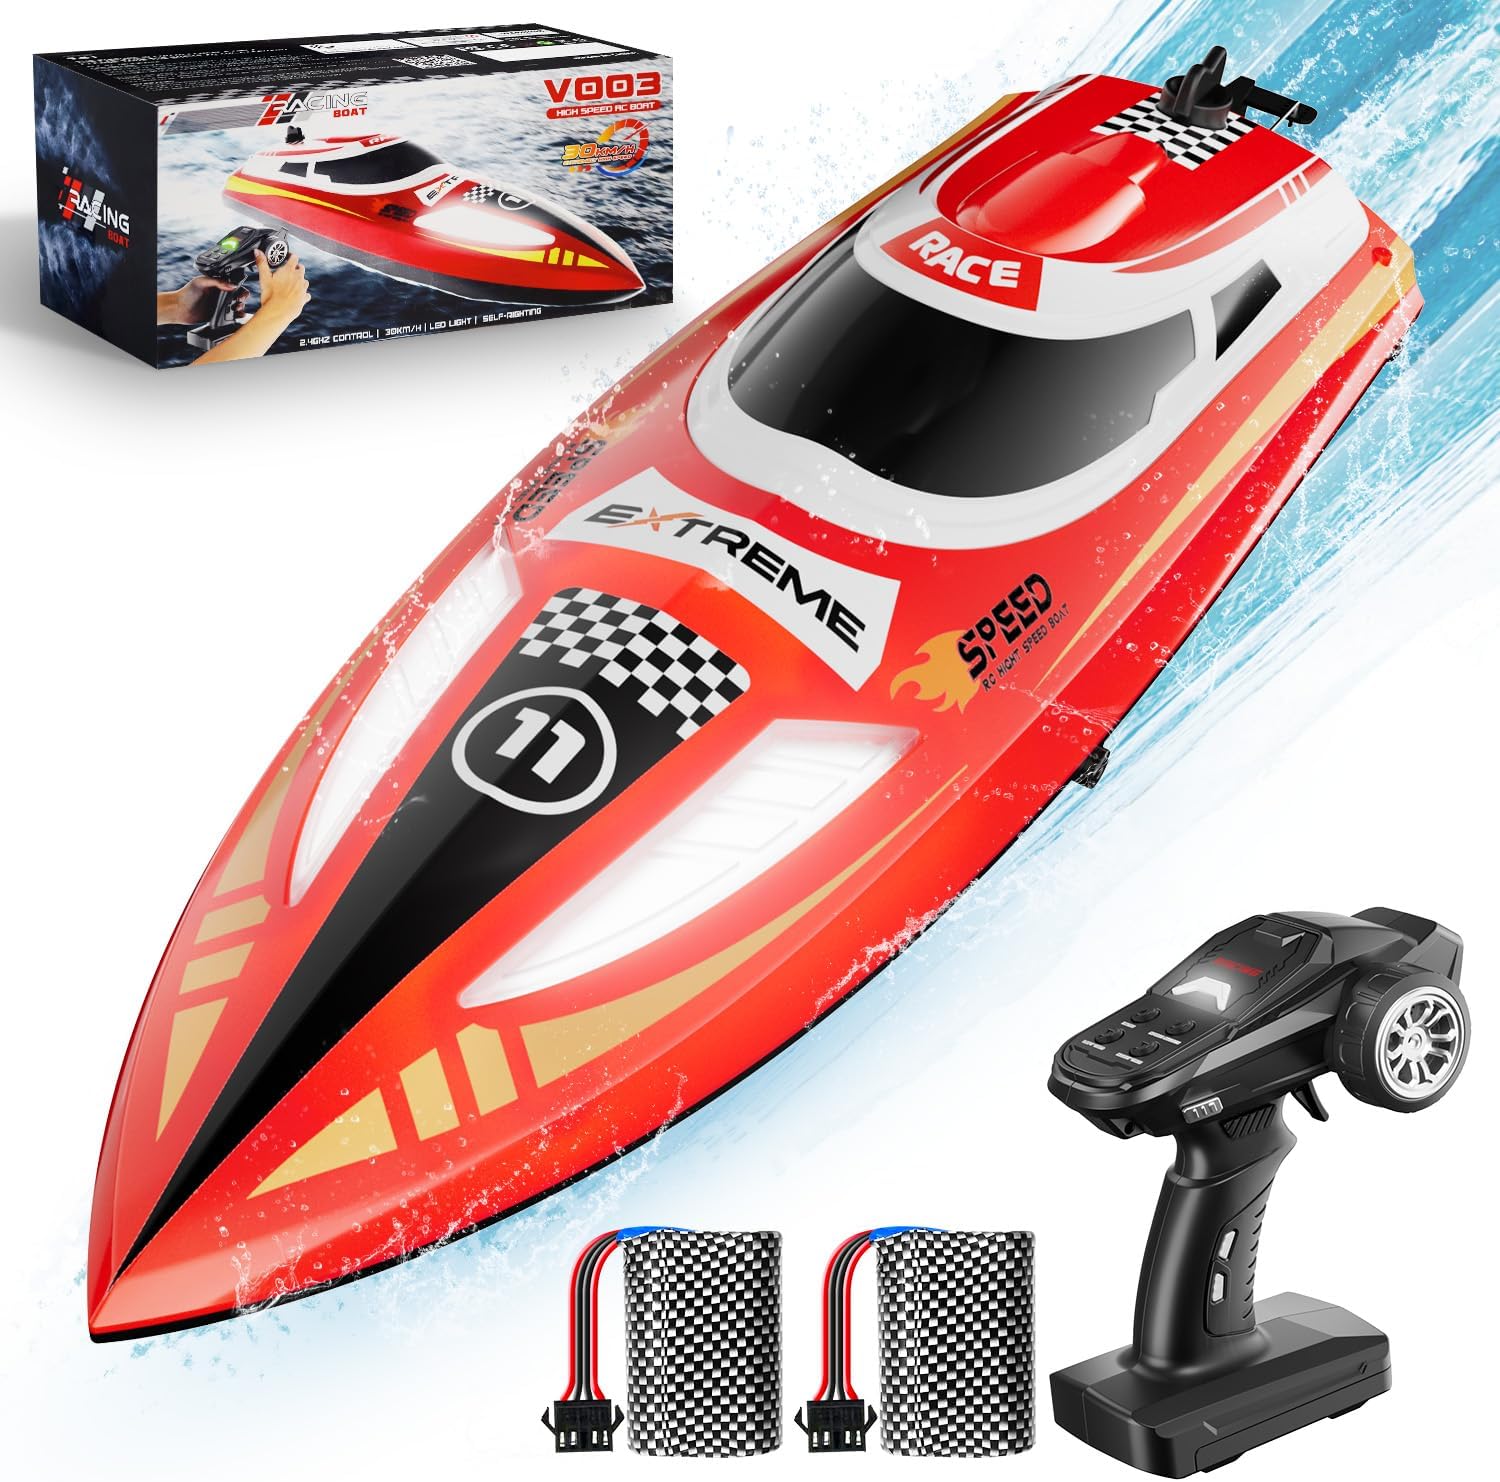 Best Remote Control Boat: Top 5 Picks for High-Speed Water Adventures